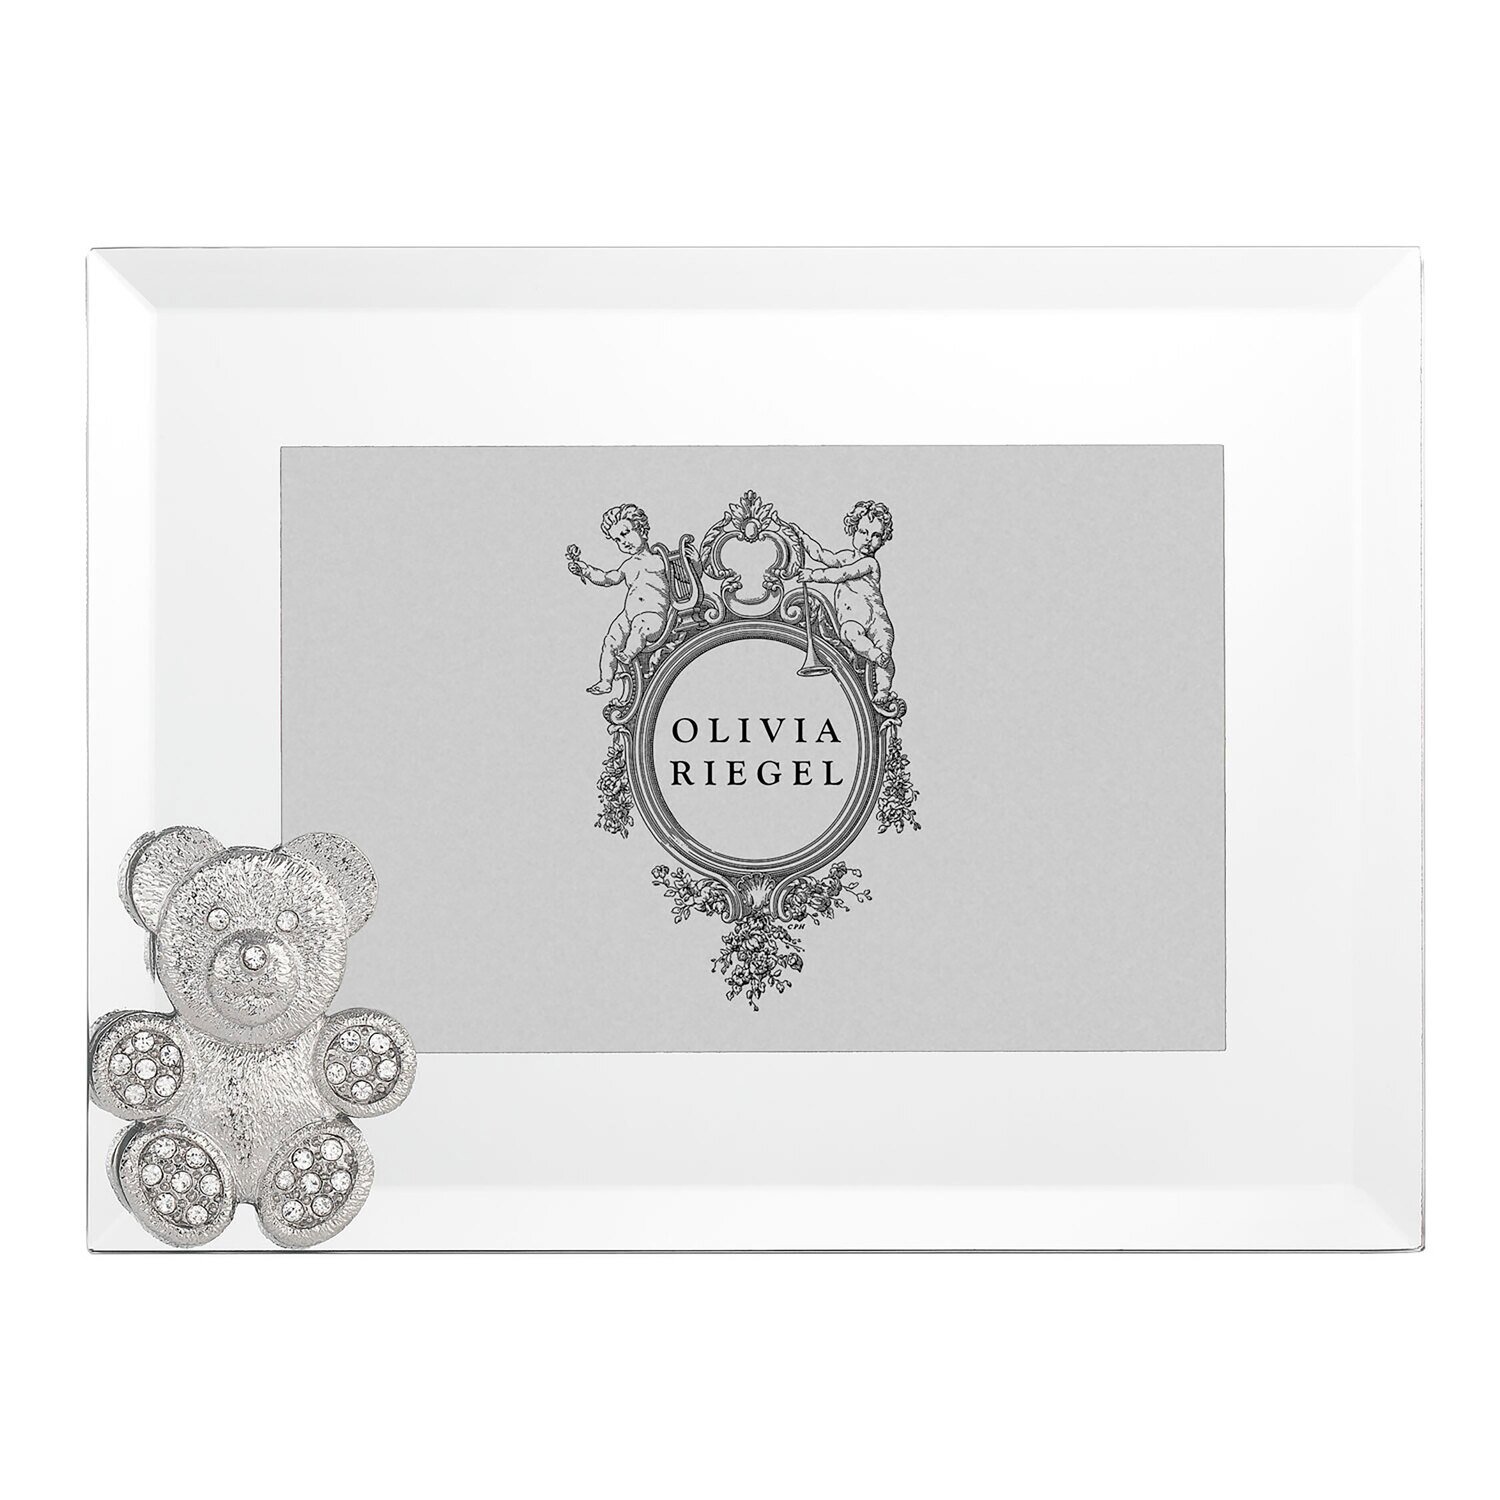 Olivia Riegel Silver Teddy Bear 4 x 6 Inch Picture Frame RT4886